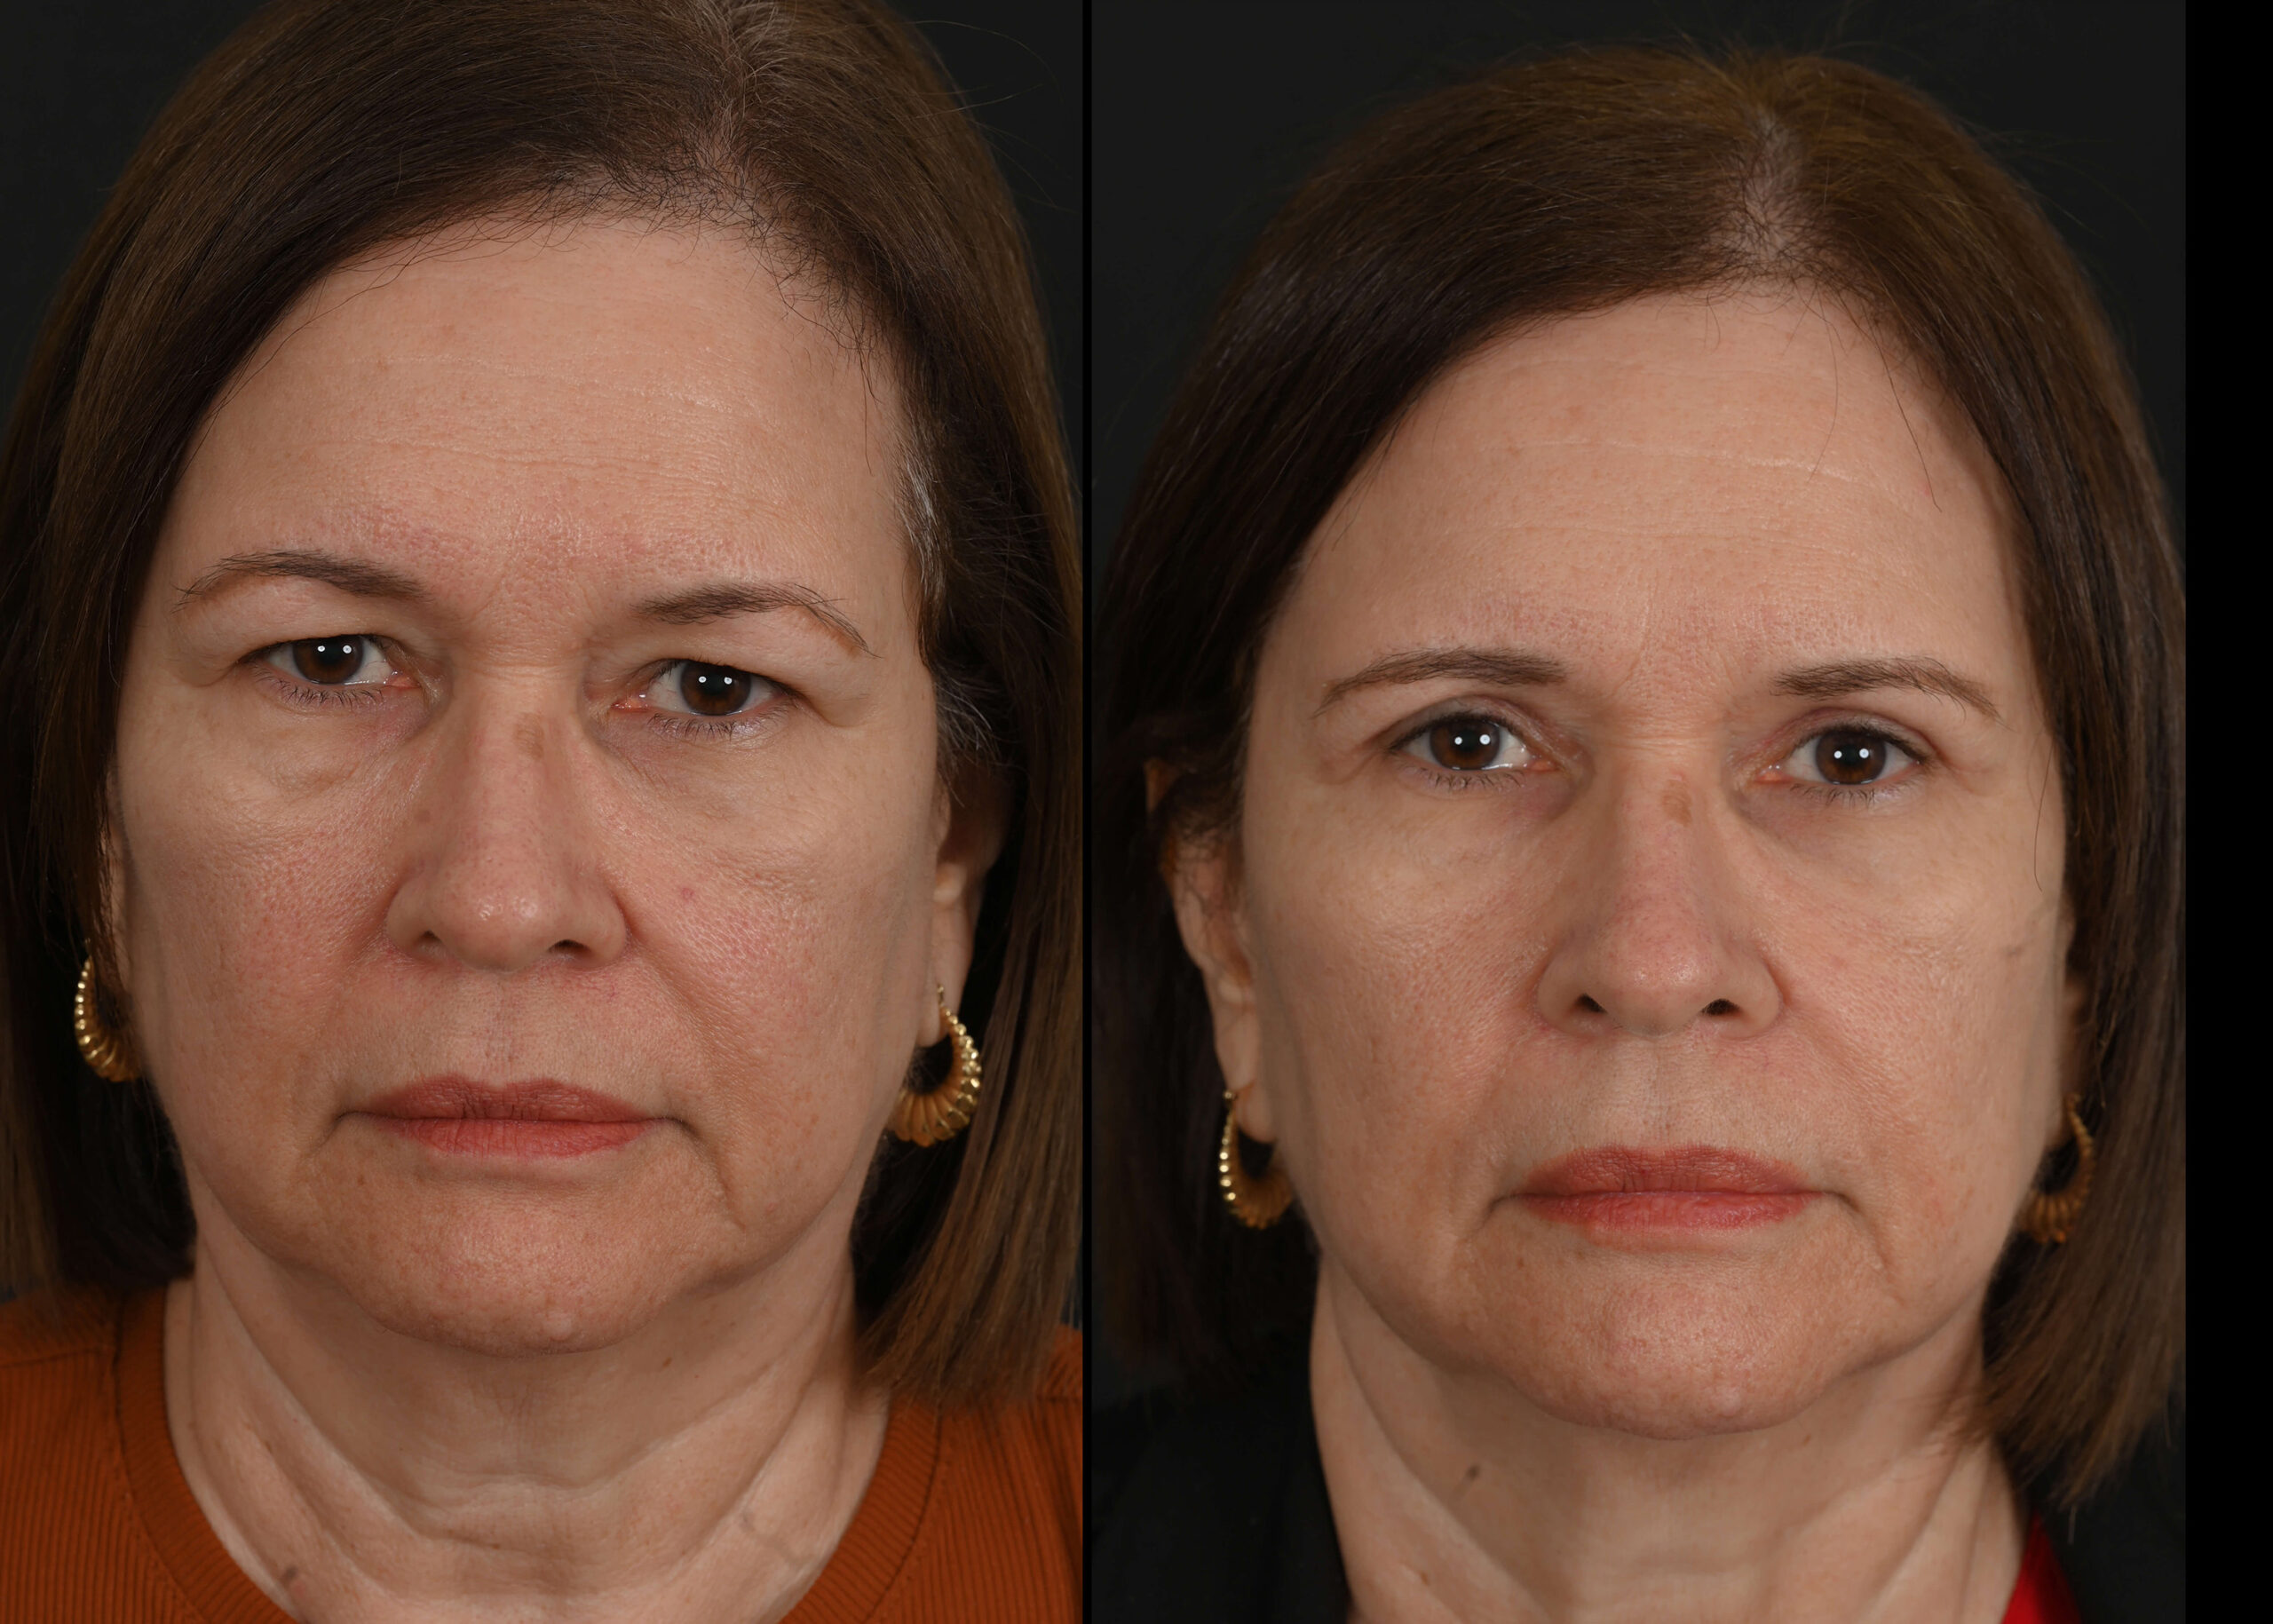 Eyelid surgery patient, before and after eyelid surgery by Houston facial surgeon Dr. Michel Siegel